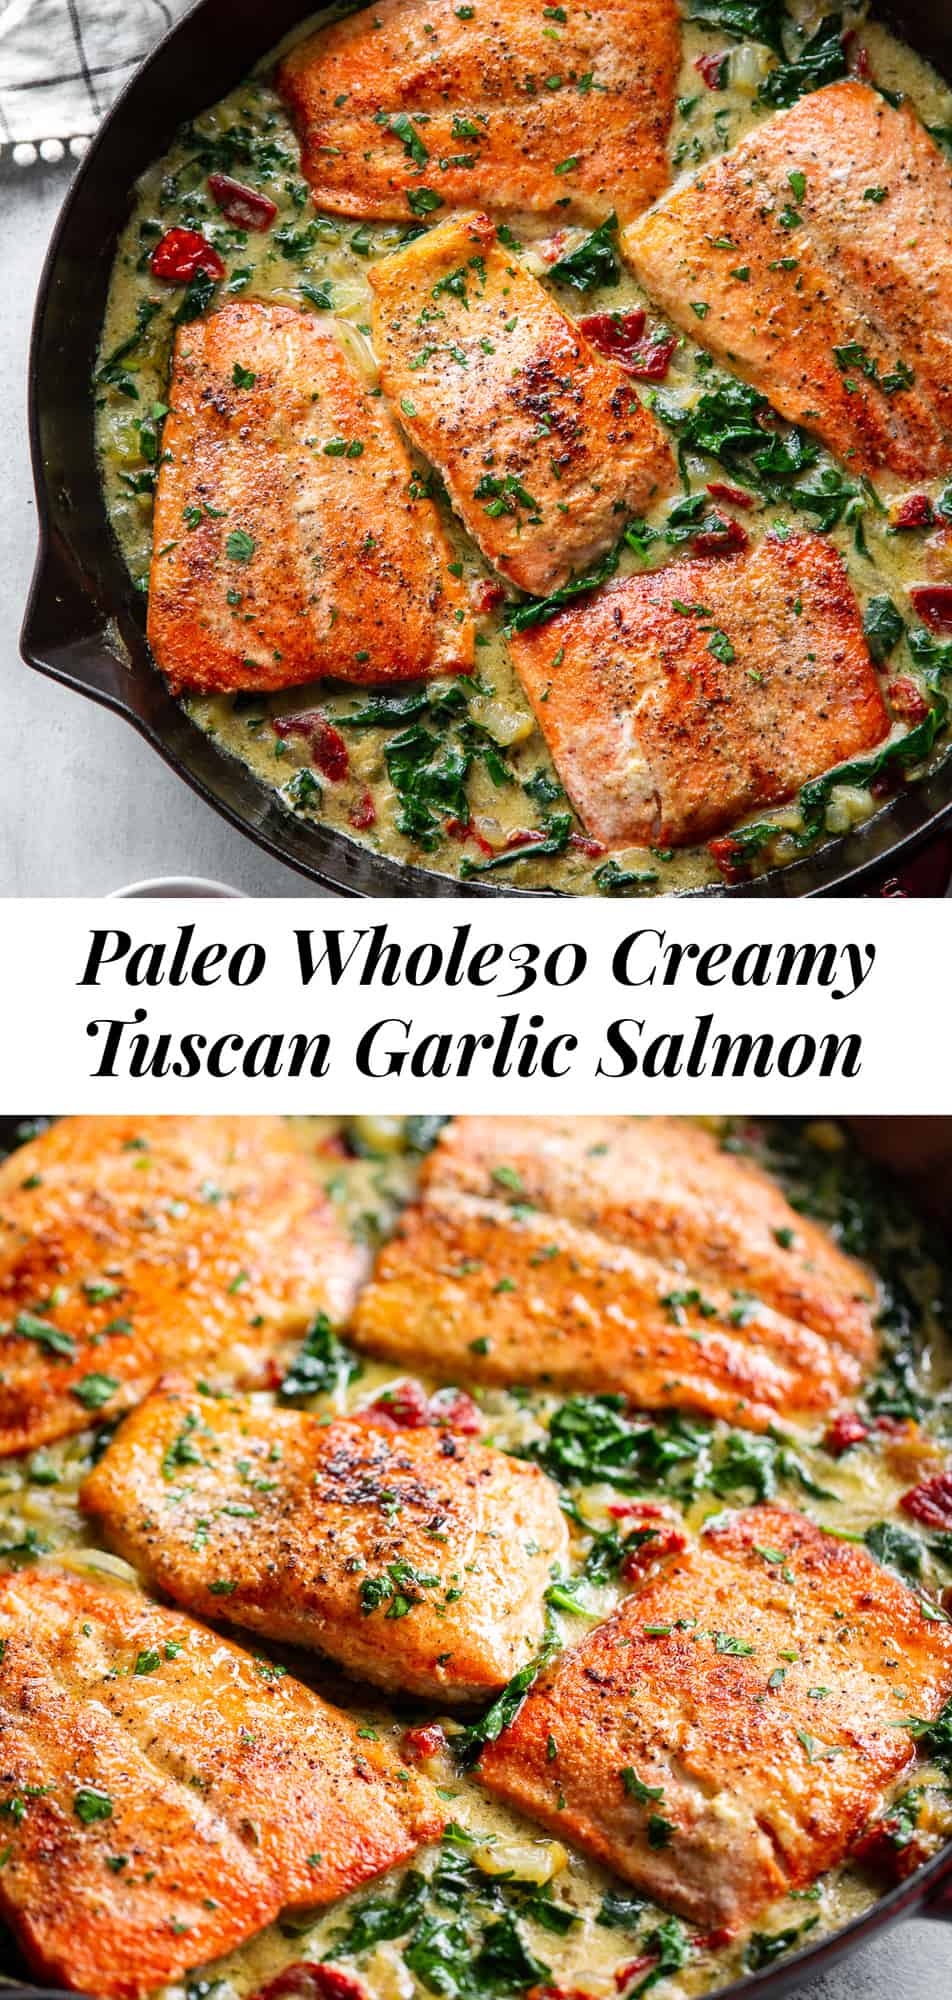 This creamy paleo tuscan garlic salmon is a super-tasty one-skillet meal that’s perfect for weeknights and full of flavor! Perfectly seasoned, seared salmon with a creamy sauce packed with Italian seasonings, spinach and sun-dried tomatoes. Paleo, dairy-free, Whole30, and low in carbs! #paleo #whole30 #cleaneating 